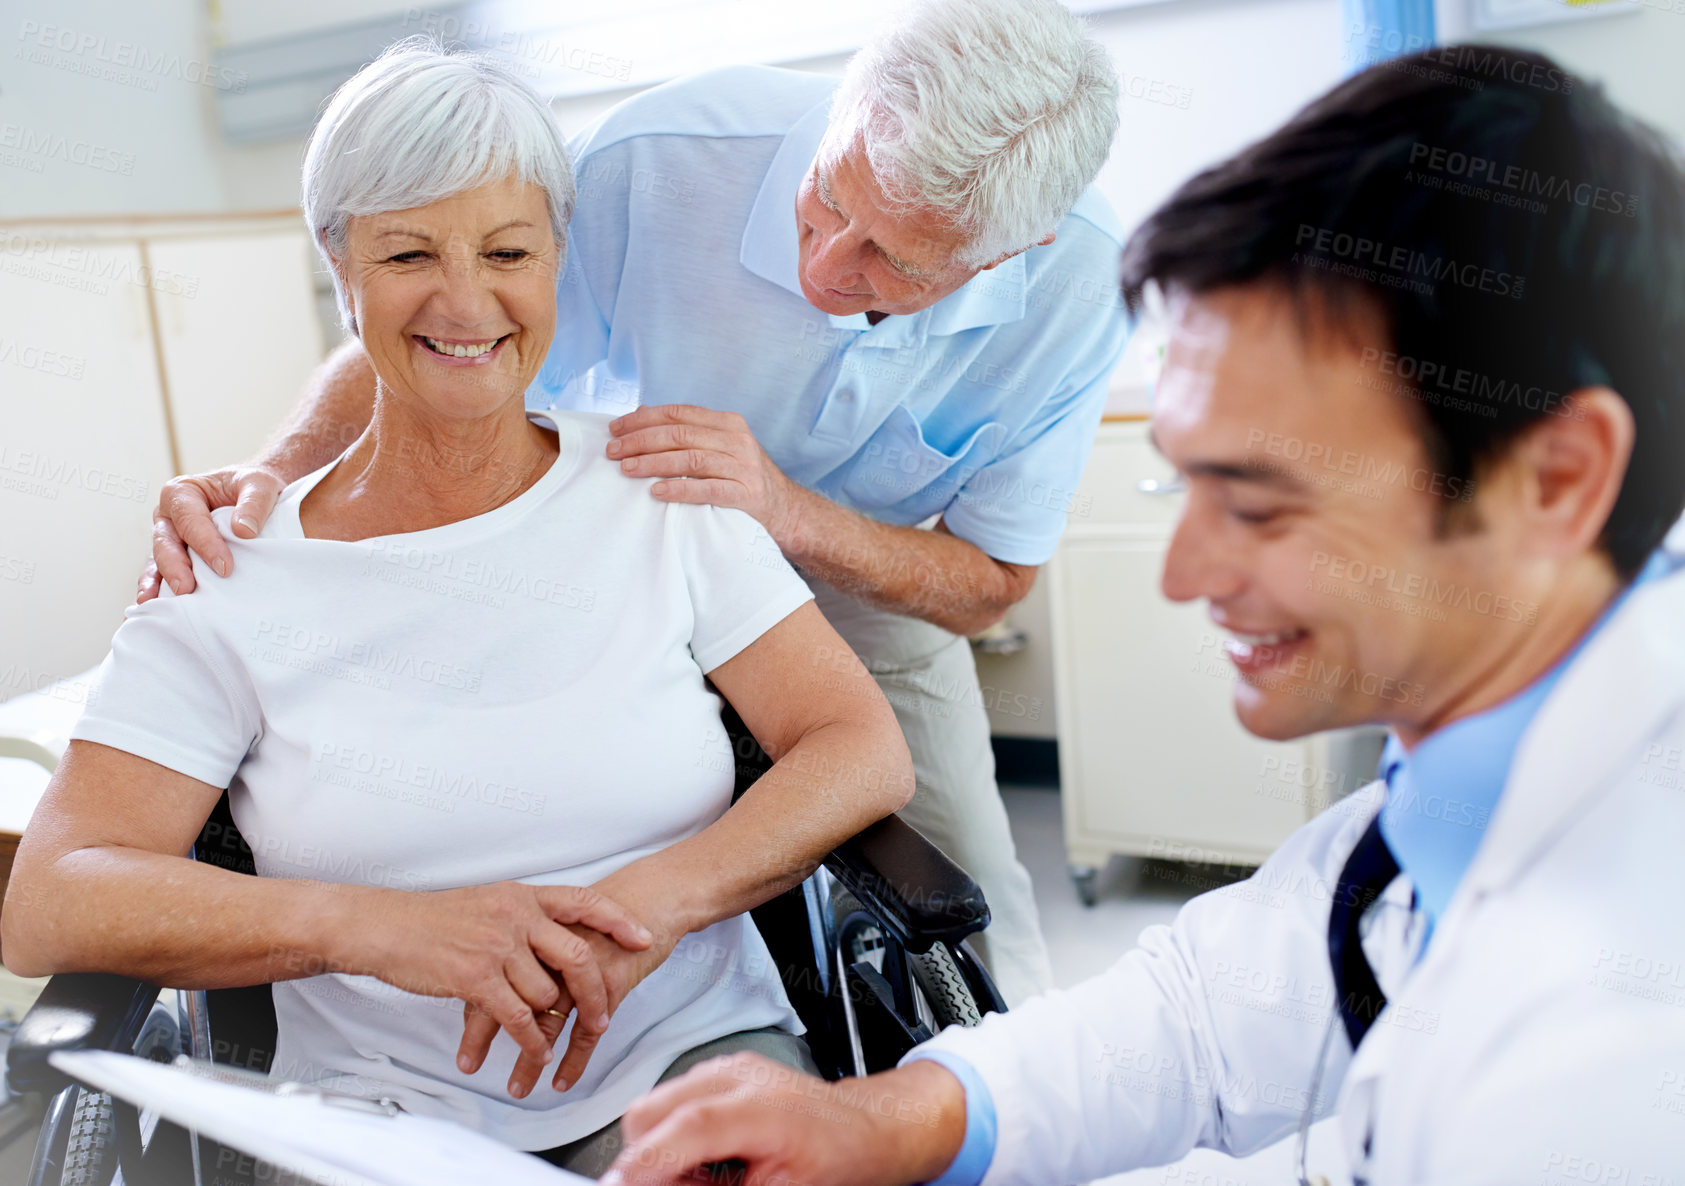 Buy stock photo Shot of a senior couple getting good news from their doctor